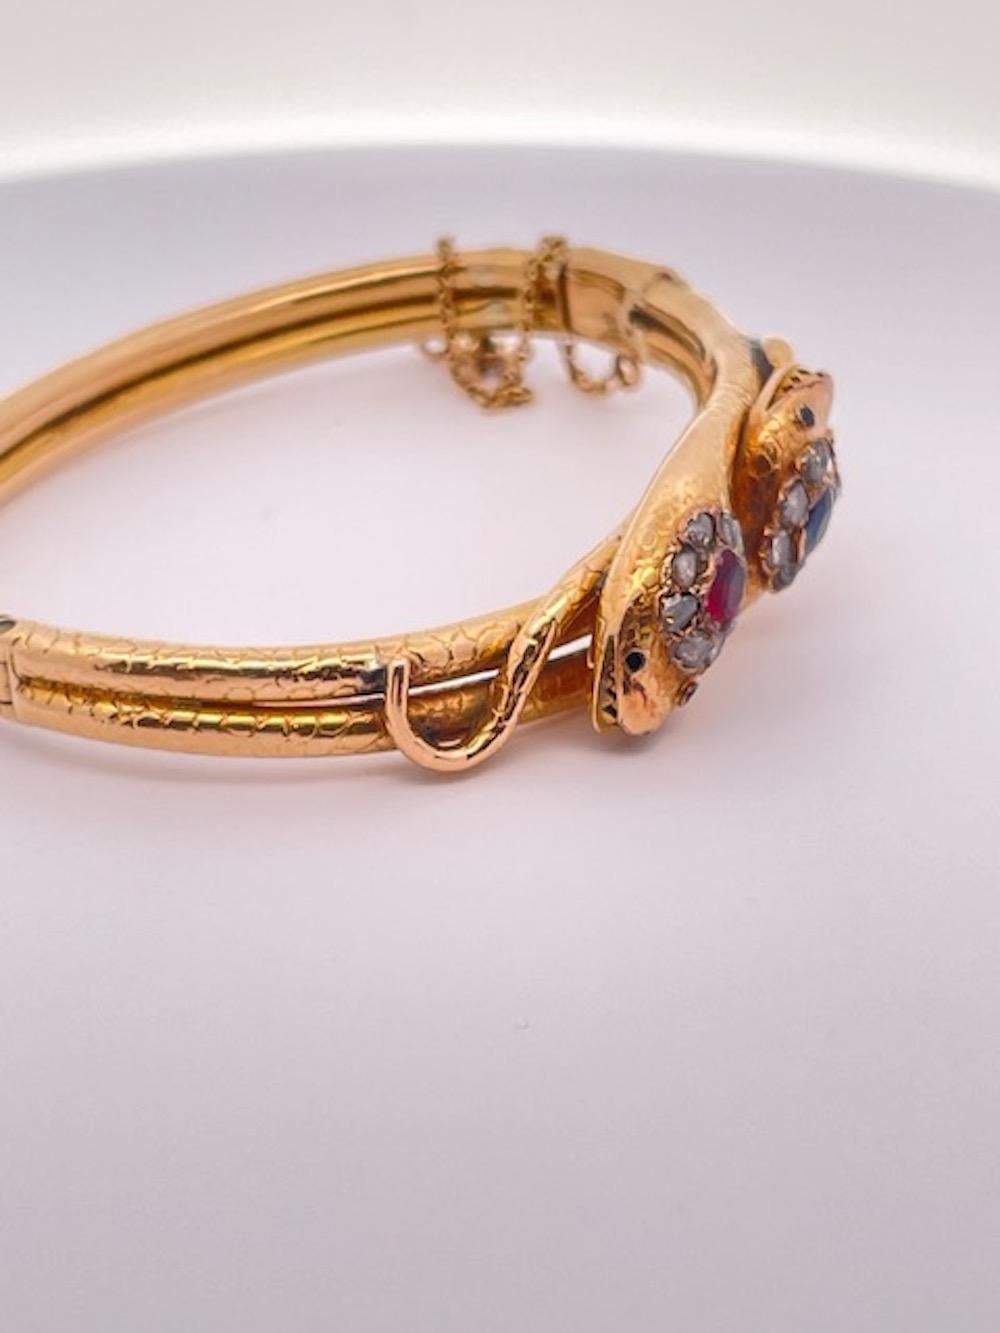 Antique Snake Bracelet Double Head and Body 18k, 1880s In Good Condition For Sale In North Hollywood, CA